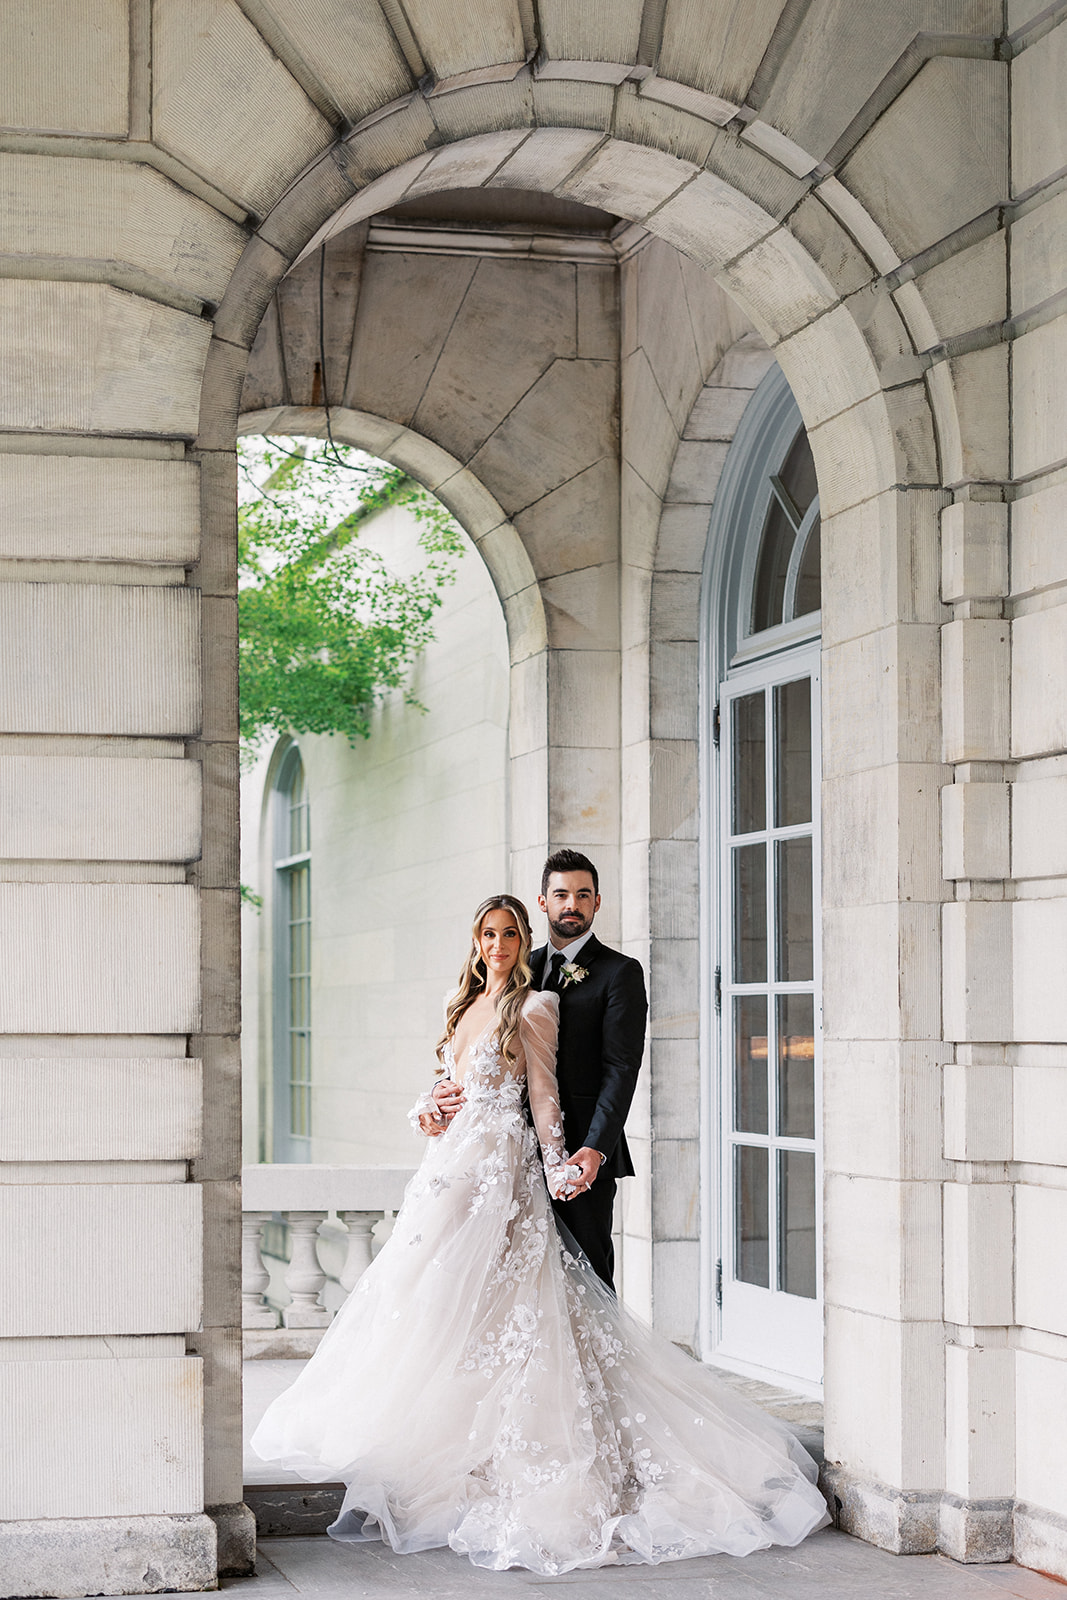 Newlyweds stand together holding hands under a large arch on a terrace